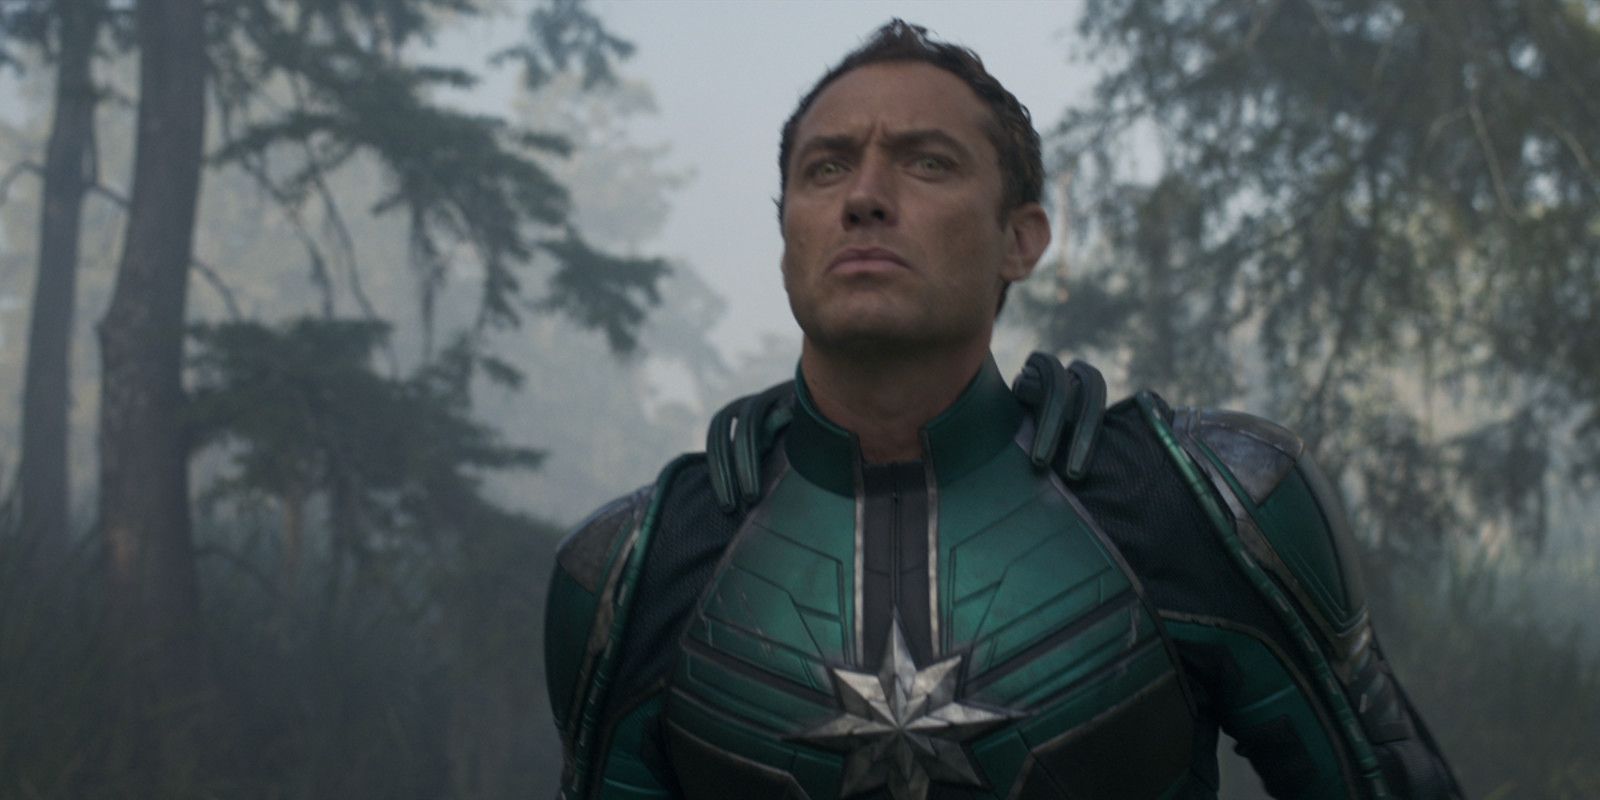 Jude Law as Yon-Rogg in Captain Marvel